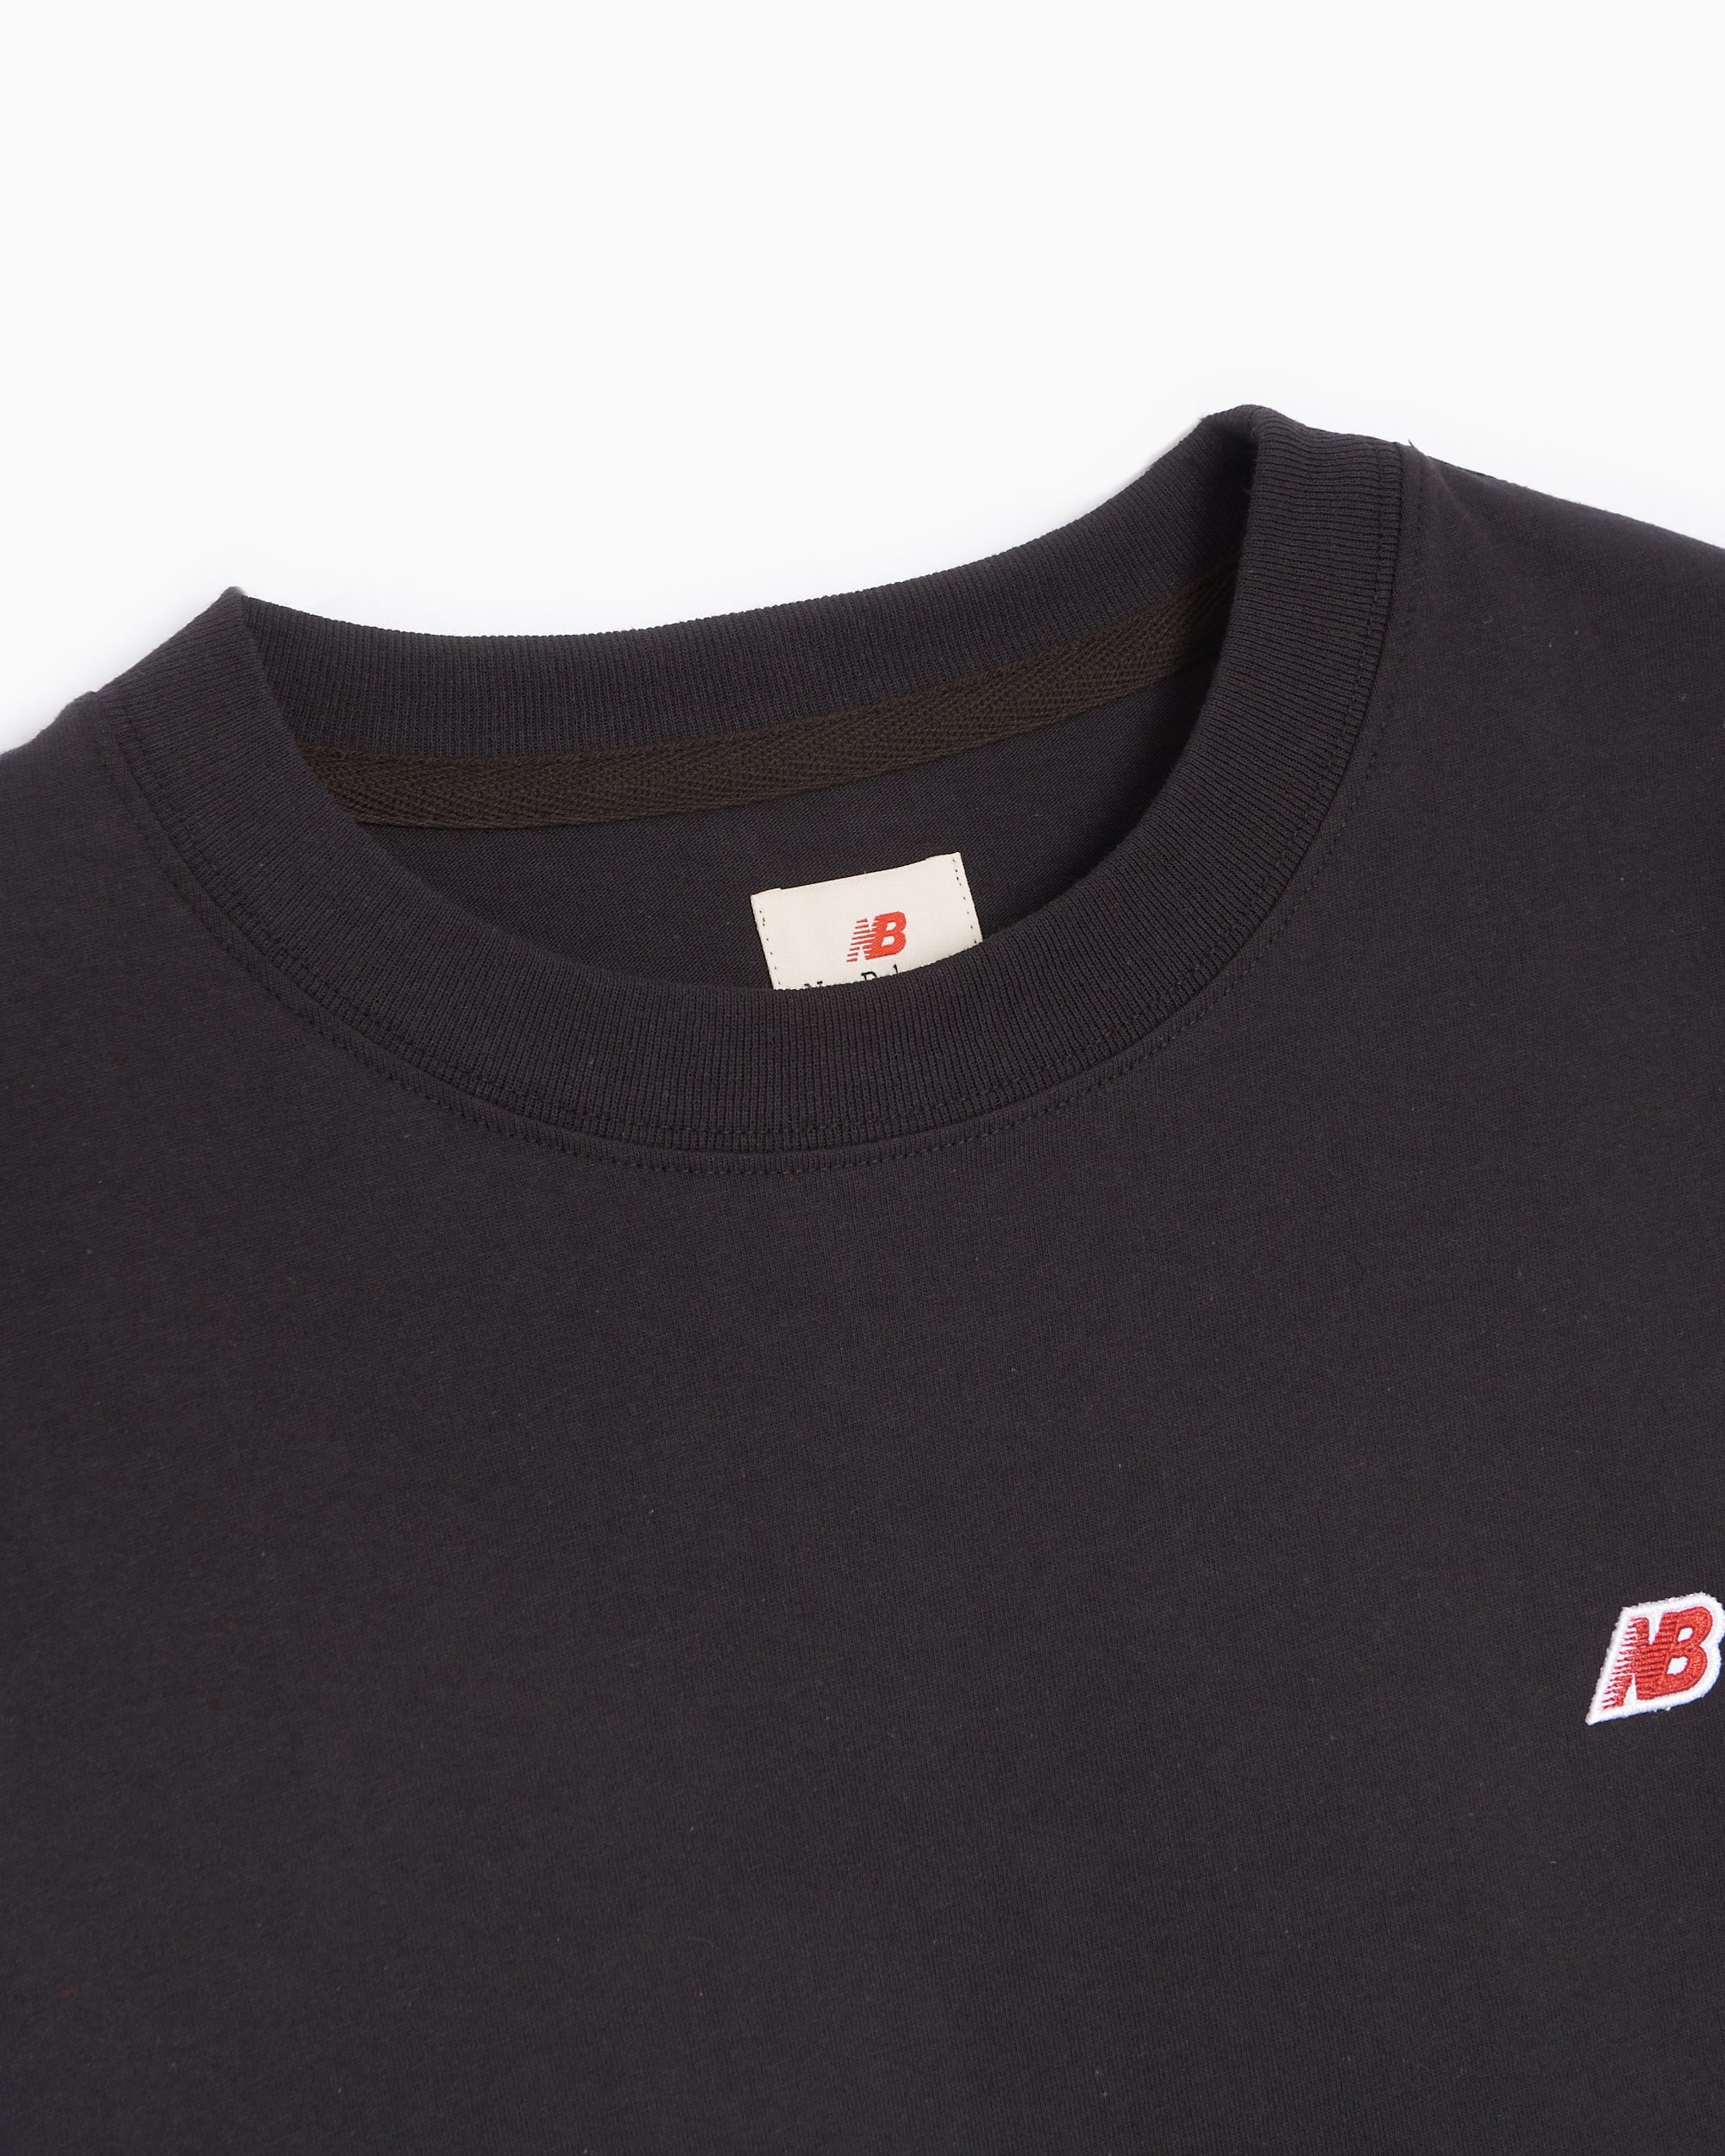 New Balance Made in USA Unisex Core T-Shirt Black MT21543-BK| Buy Online at  FOOTDISTRICT